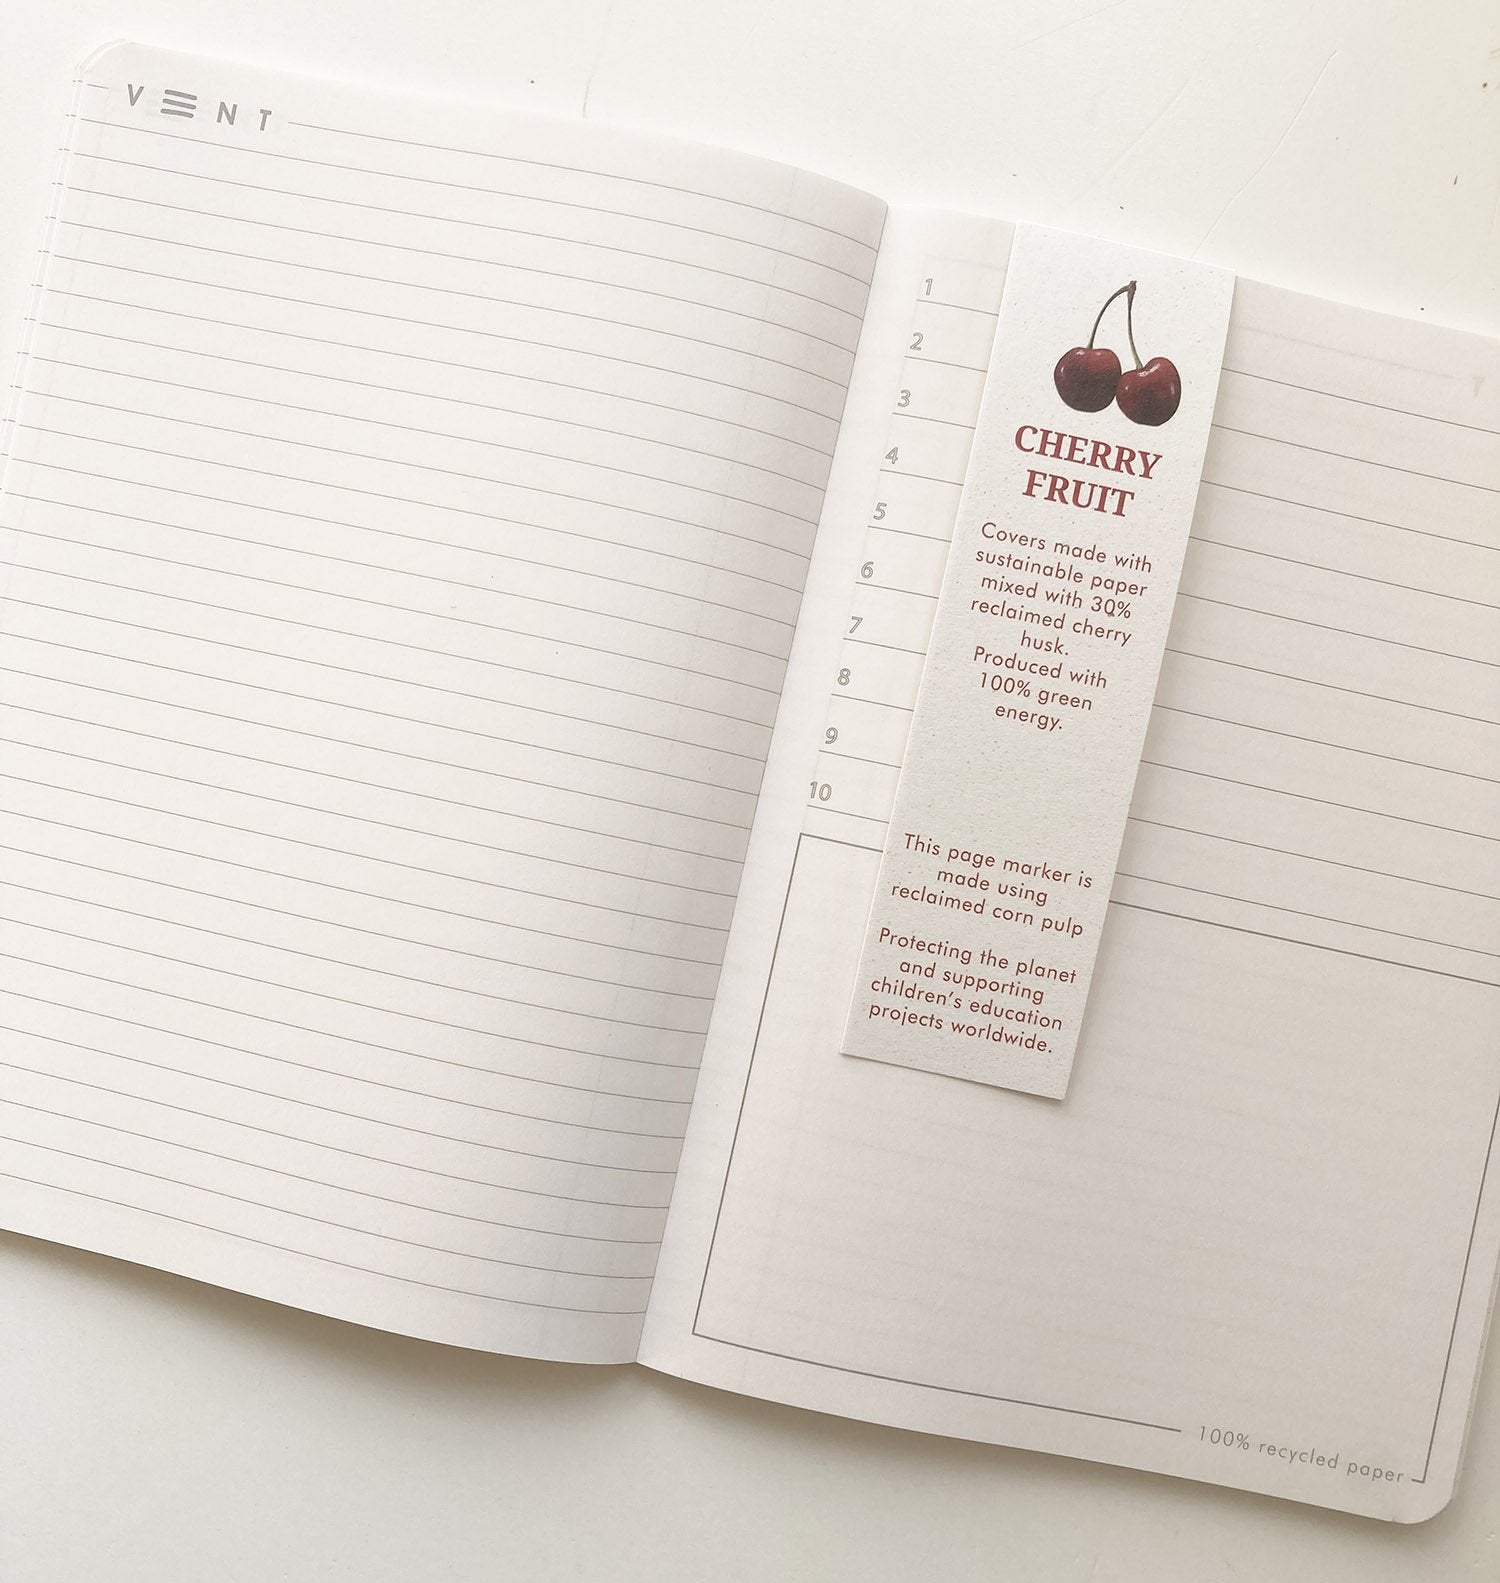 Recycled A5 Notebook from Kiwi Fruit by Vent for Change